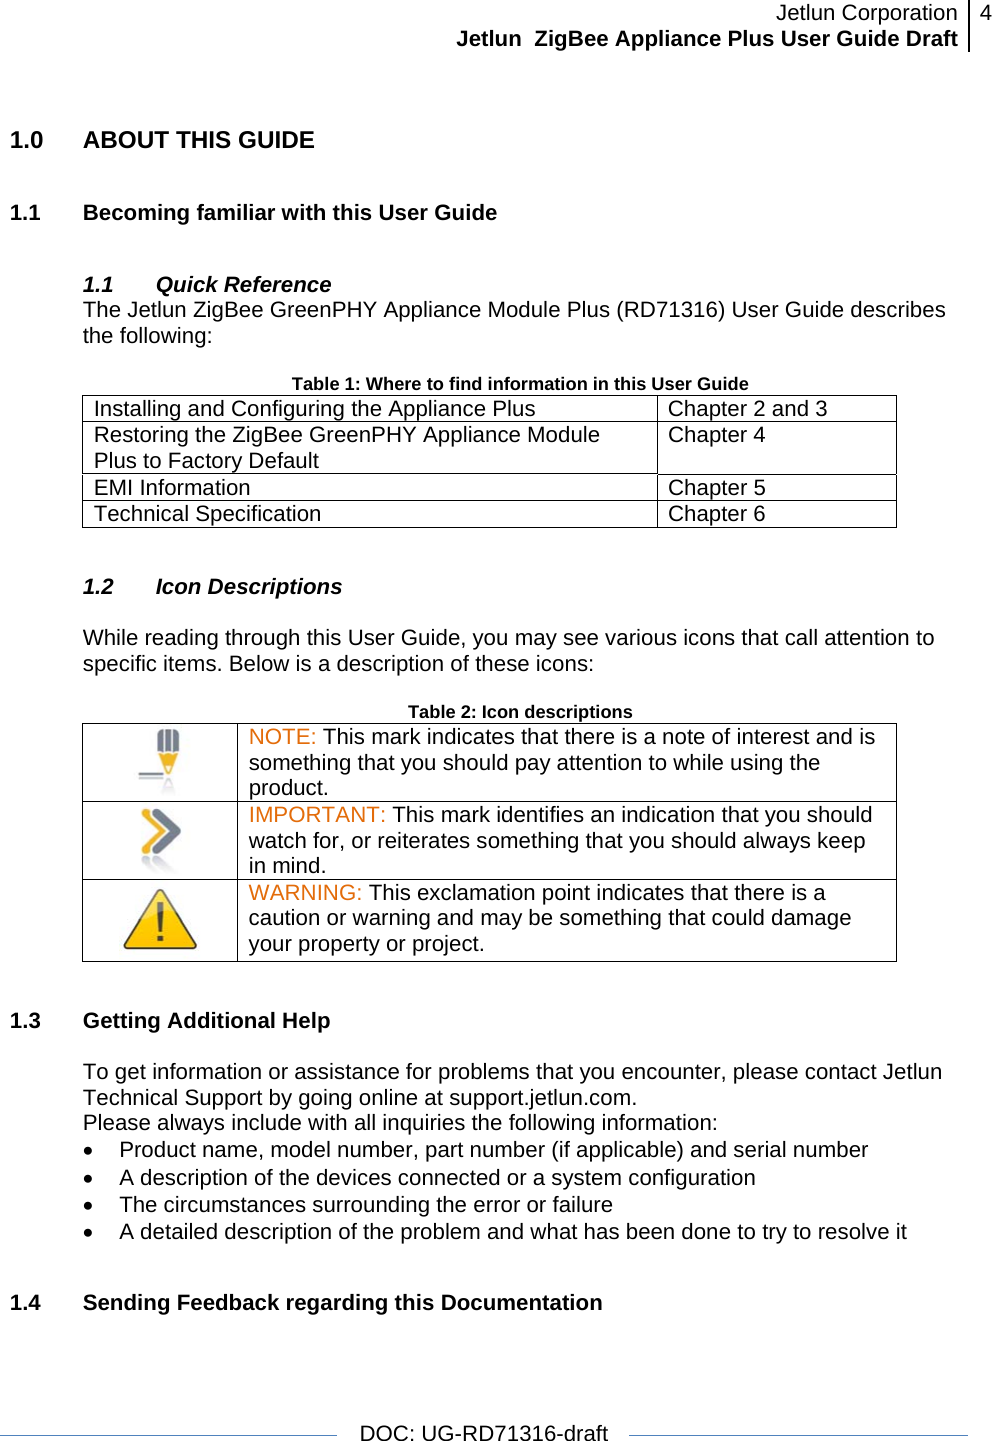 Jetlun CorporationJetlun  ZigBee Appliance Plus User Guide Draft 4   DOC: UG-RD71316-draft  1.0  ABOUT THIS GUIDE  1.1  Becoming familiar with this User Guide  1.1 Quick Reference The Jetlun ZigBee GreenPHY Appliance Module Plus (RD71316) User Guide describes the following:  Table 1: Where to find information in this User Guide Installing and Configuring the Appliance Plus  Chapter 2 and 3 Restoring the ZigBee GreenPHY Appliance Module Plus to Factory Default  Chapter 4 EMI Information  Chapter 5 Technical Specification  Chapter 6  1.2 Icon Descriptions  While reading through this User Guide, you may see various icons that call attention to specific items. Below is a description of these icons:  Table 2: Icon descriptions  NOTE: This mark indicates that there is a note of interest and is something that you should pay attention to while using the product.  IMPORTANT: This mark identifies an indication that you should watch for, or reiterates something that you should always keep in mind.  WARNING: This exclamation point indicates that there is a caution or warning and may be something that could damage your property or project.   1.3 Getting Additional Help  To get information or assistance for problems that you encounter, please contact Jetlun Technical Support by going online at support.jetlun.com. Please always include with all inquiries the following information: •  Product name, model number, part number (if applicable) and serial number •  A description of the devices connected or a system configuration •  The circumstances surrounding the error or failure •  A detailed description of the problem and what has been done to try to resolve it  1.4  Sending Feedback regarding this Documentation  